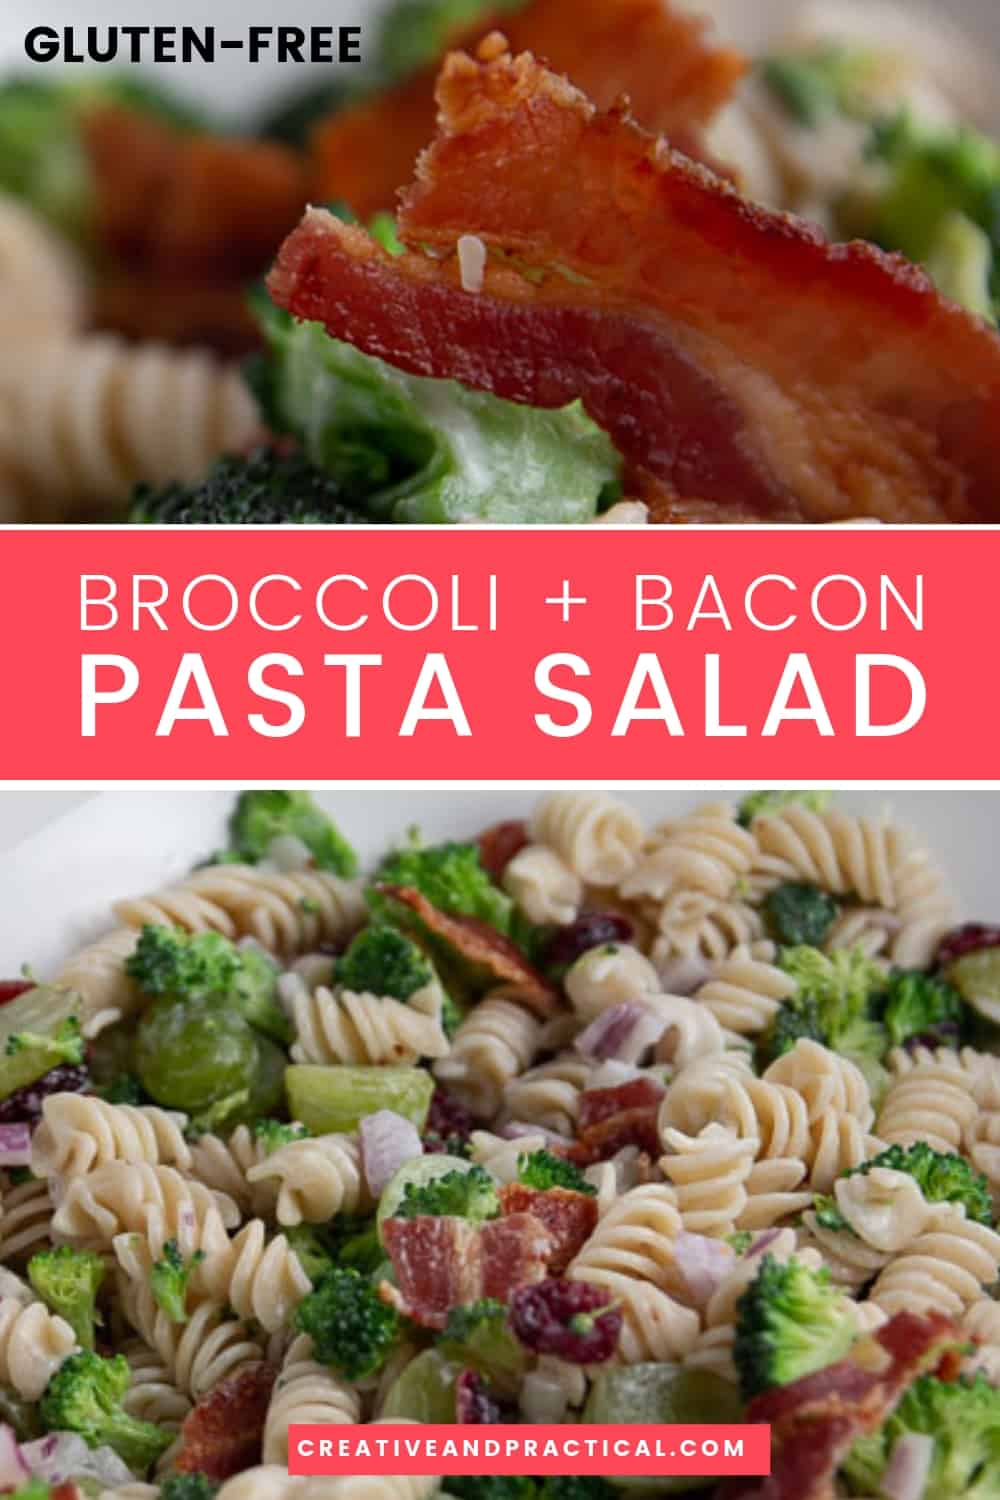 You can make this incredibly delicious Broccoli Pasta Salad with just a few simple ingredients. It's a perfect blend of sweet and savory.  Broccoli, pasta, and crispy create the foundation for this tasty salad. Make it extra special and add some grapes and cranberries. #healthy #recipes #creamy #withgrapes #bowtie ➤cheerfulcook.com via @cheerfulcook